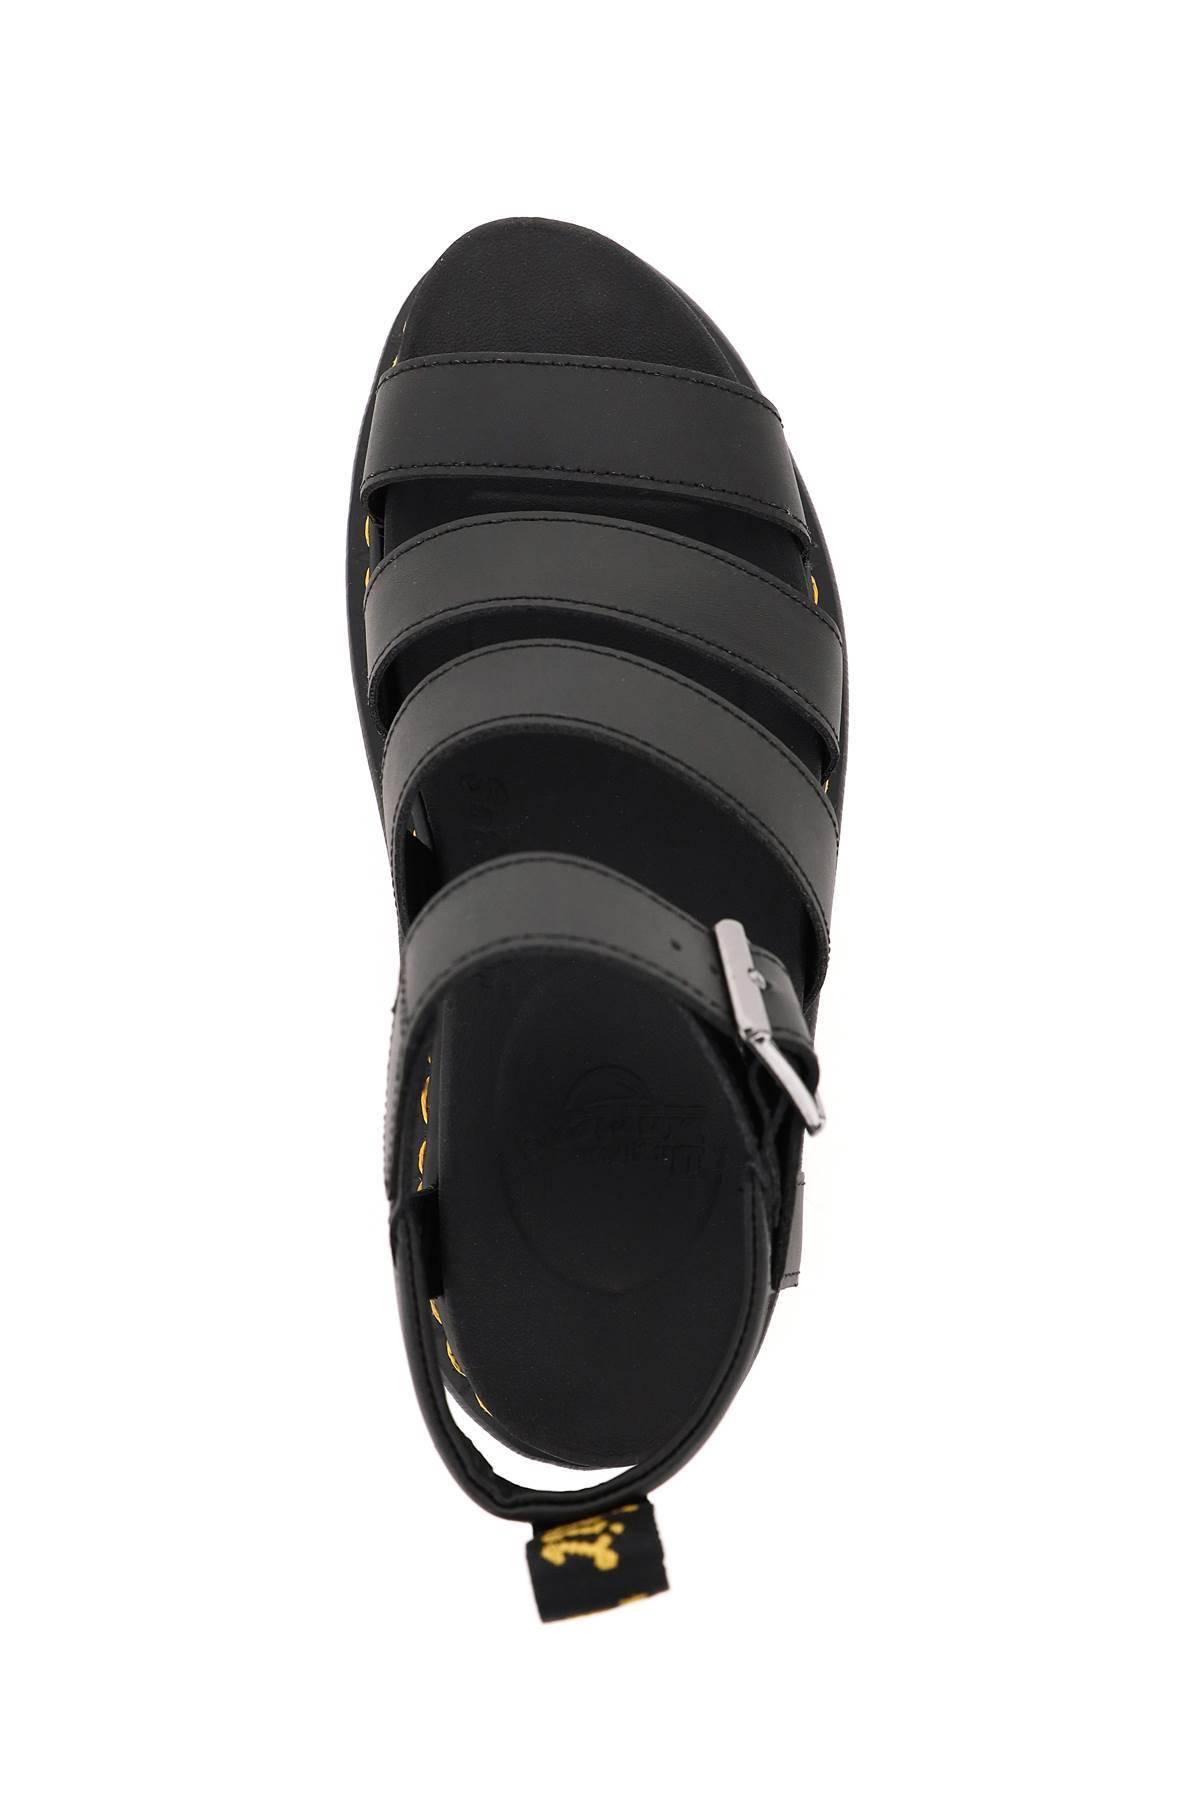 Shop Dr. Martens' Hydro Leather Blaire Sandals In Black